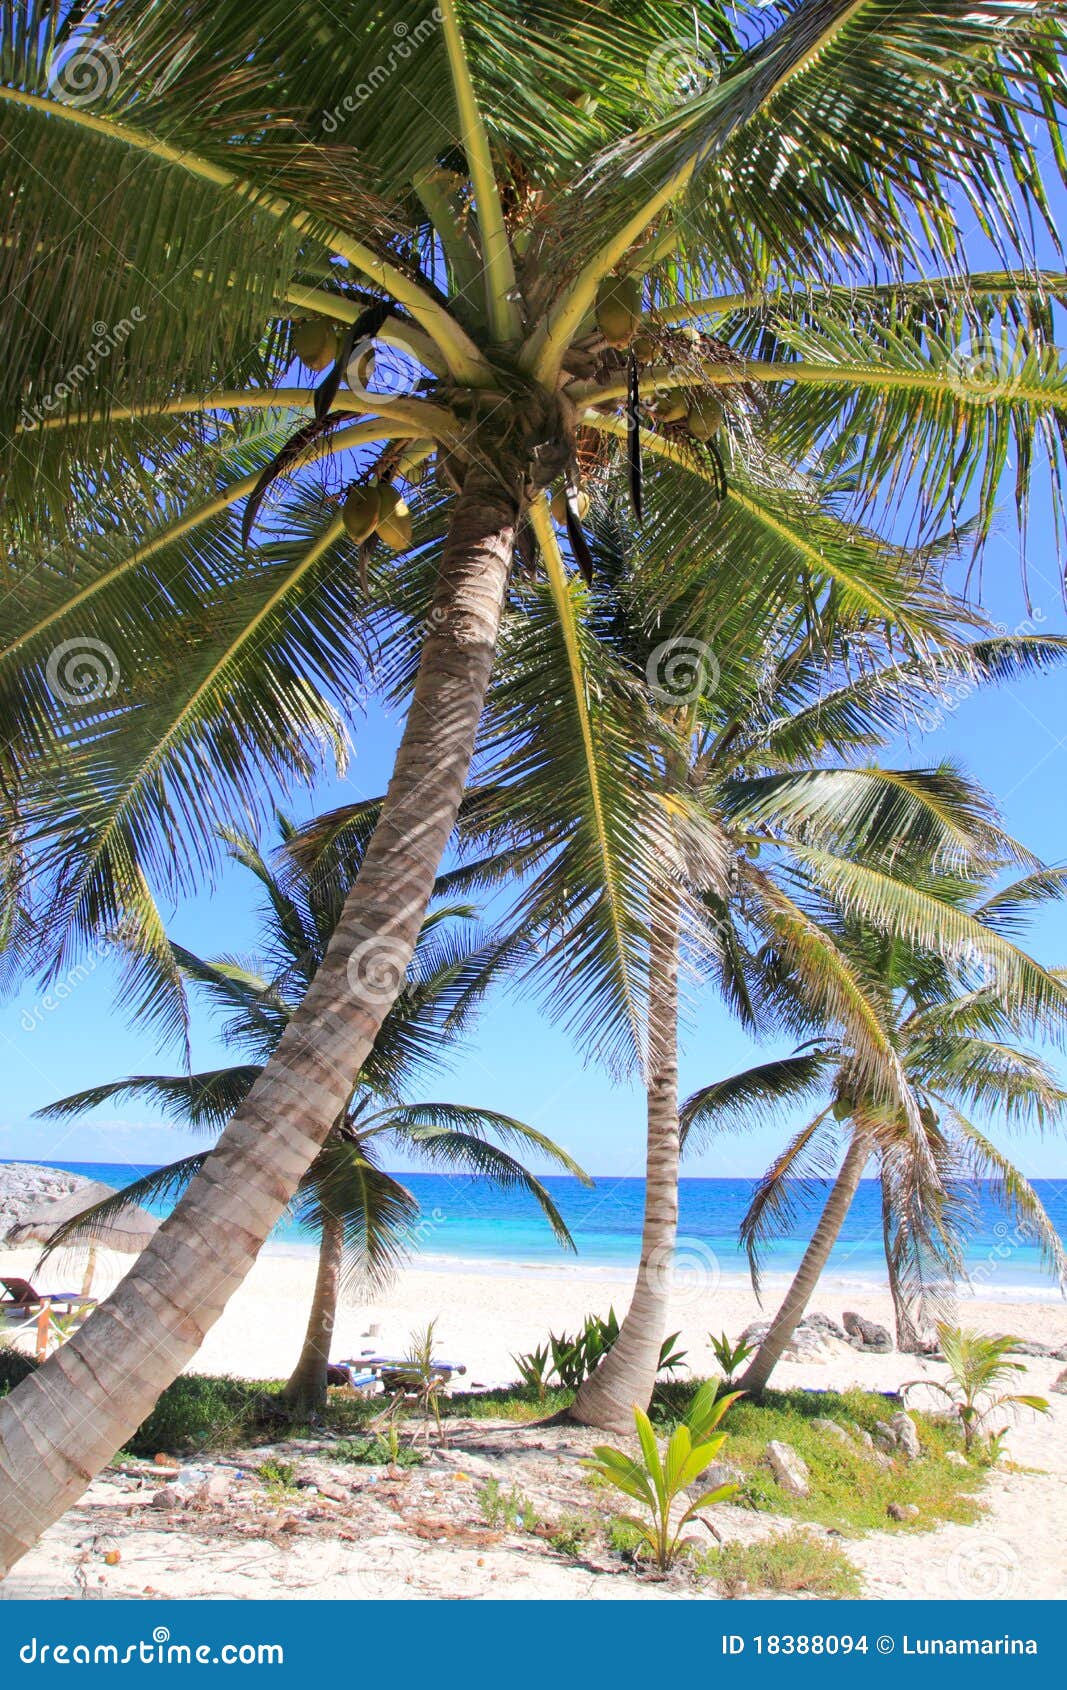 Caribbean Coconut Palm Trees In Tuquoise Sea Royalty-Free Stock Photo ...